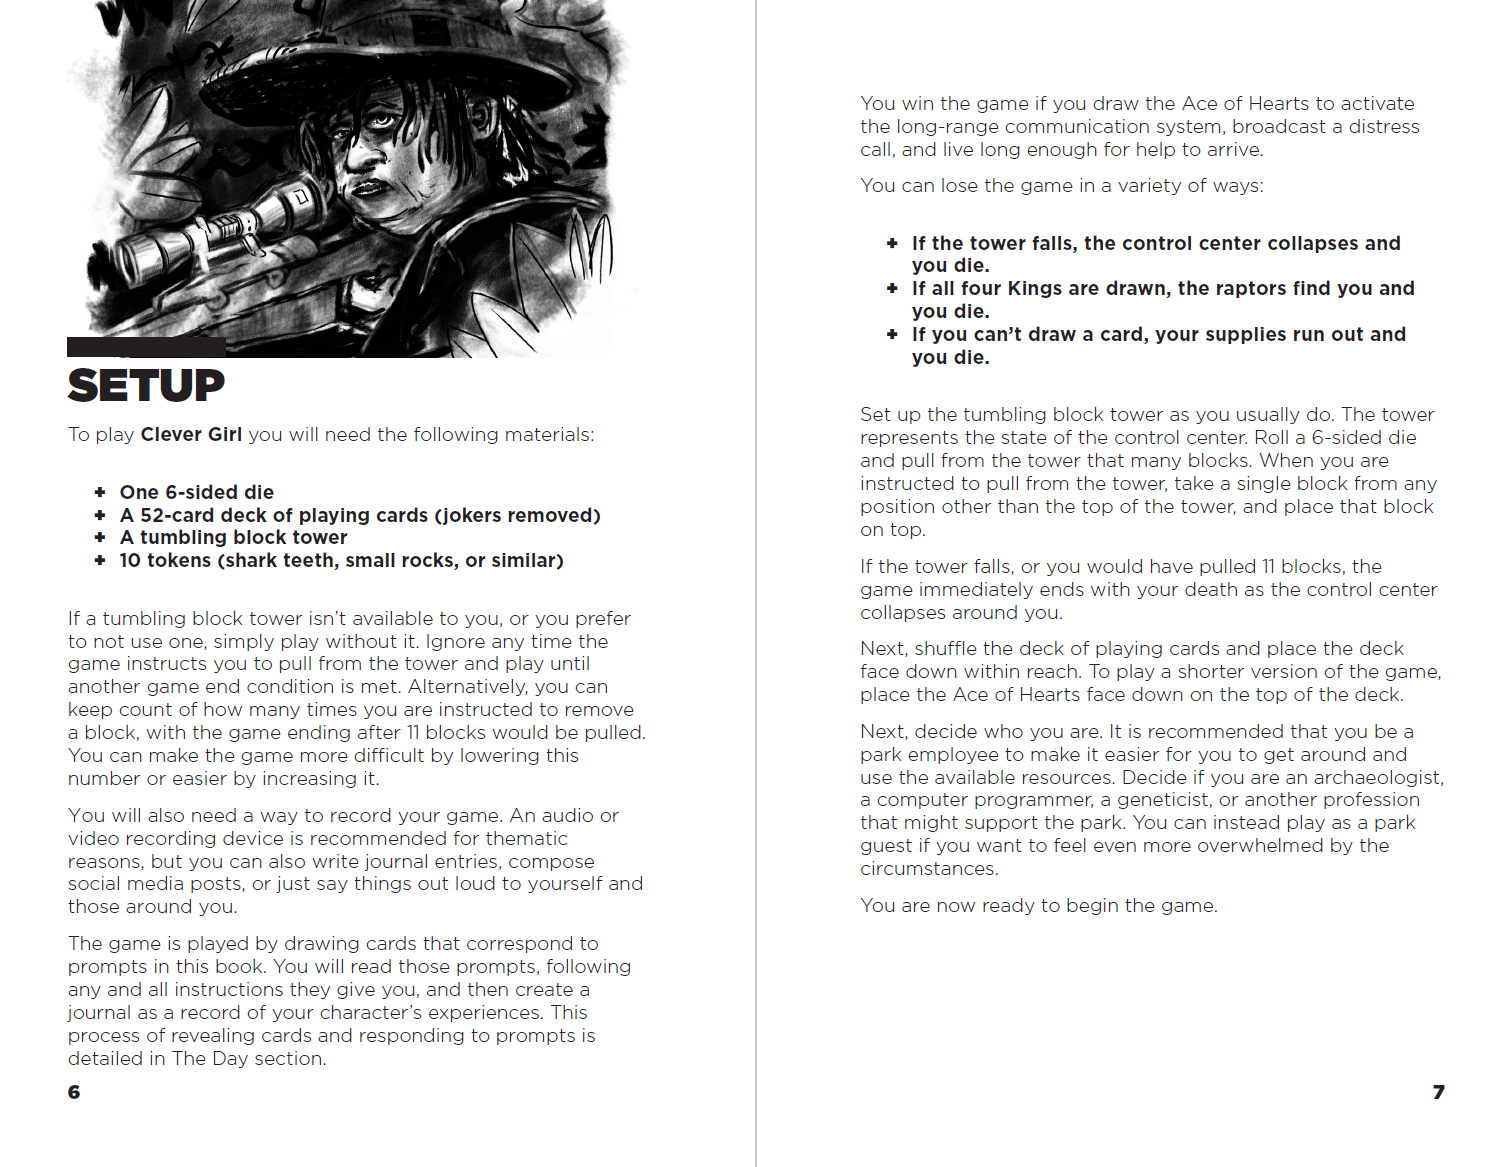 Clever Girl: Human Edition and Raptor Edition + PDF - Exalted Funeral